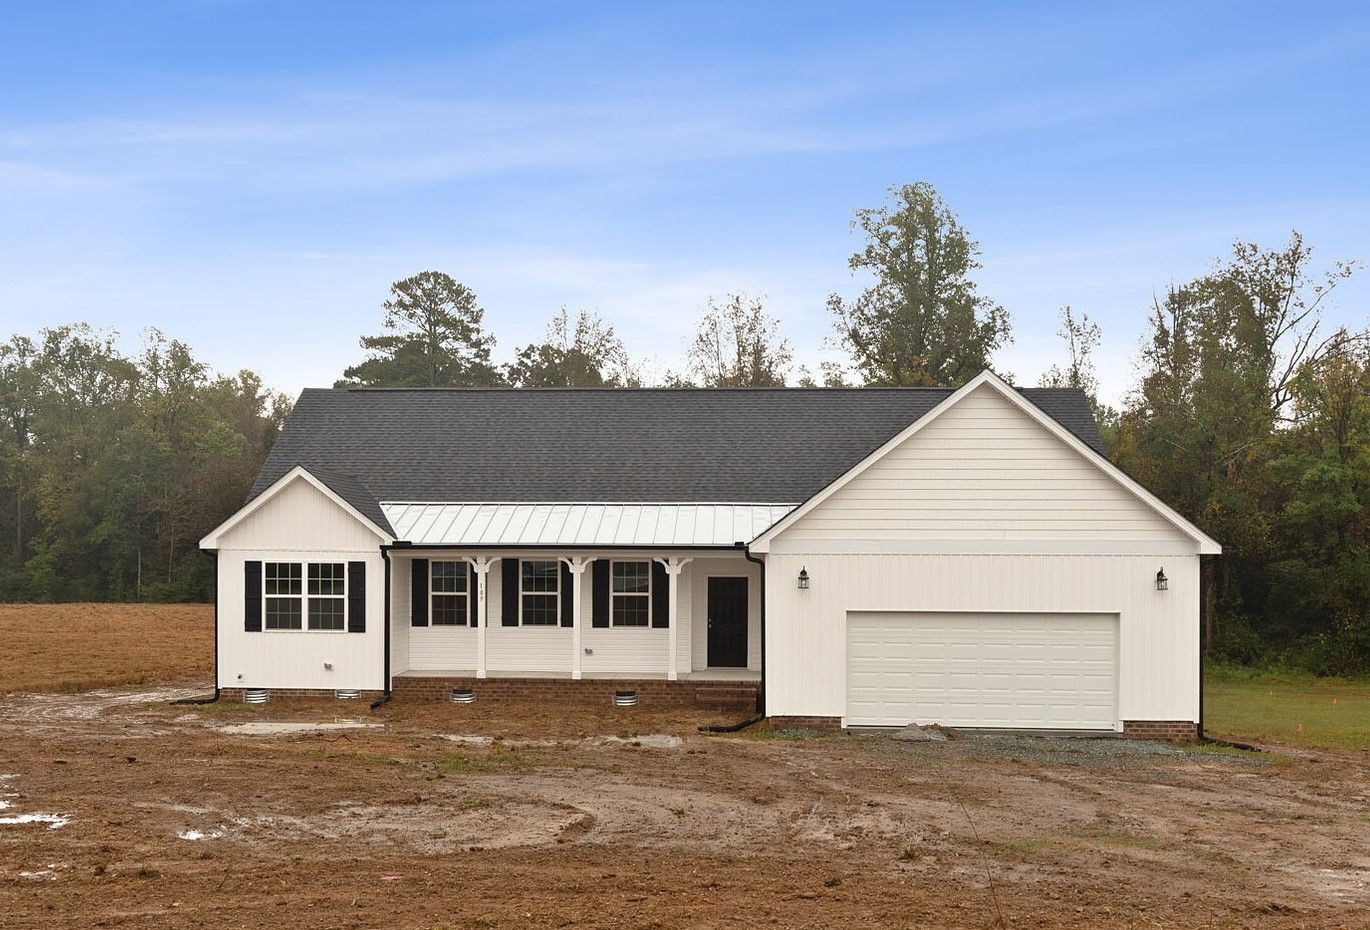 1. Valuebuild Homes - Greenville Nc - Build On Your L